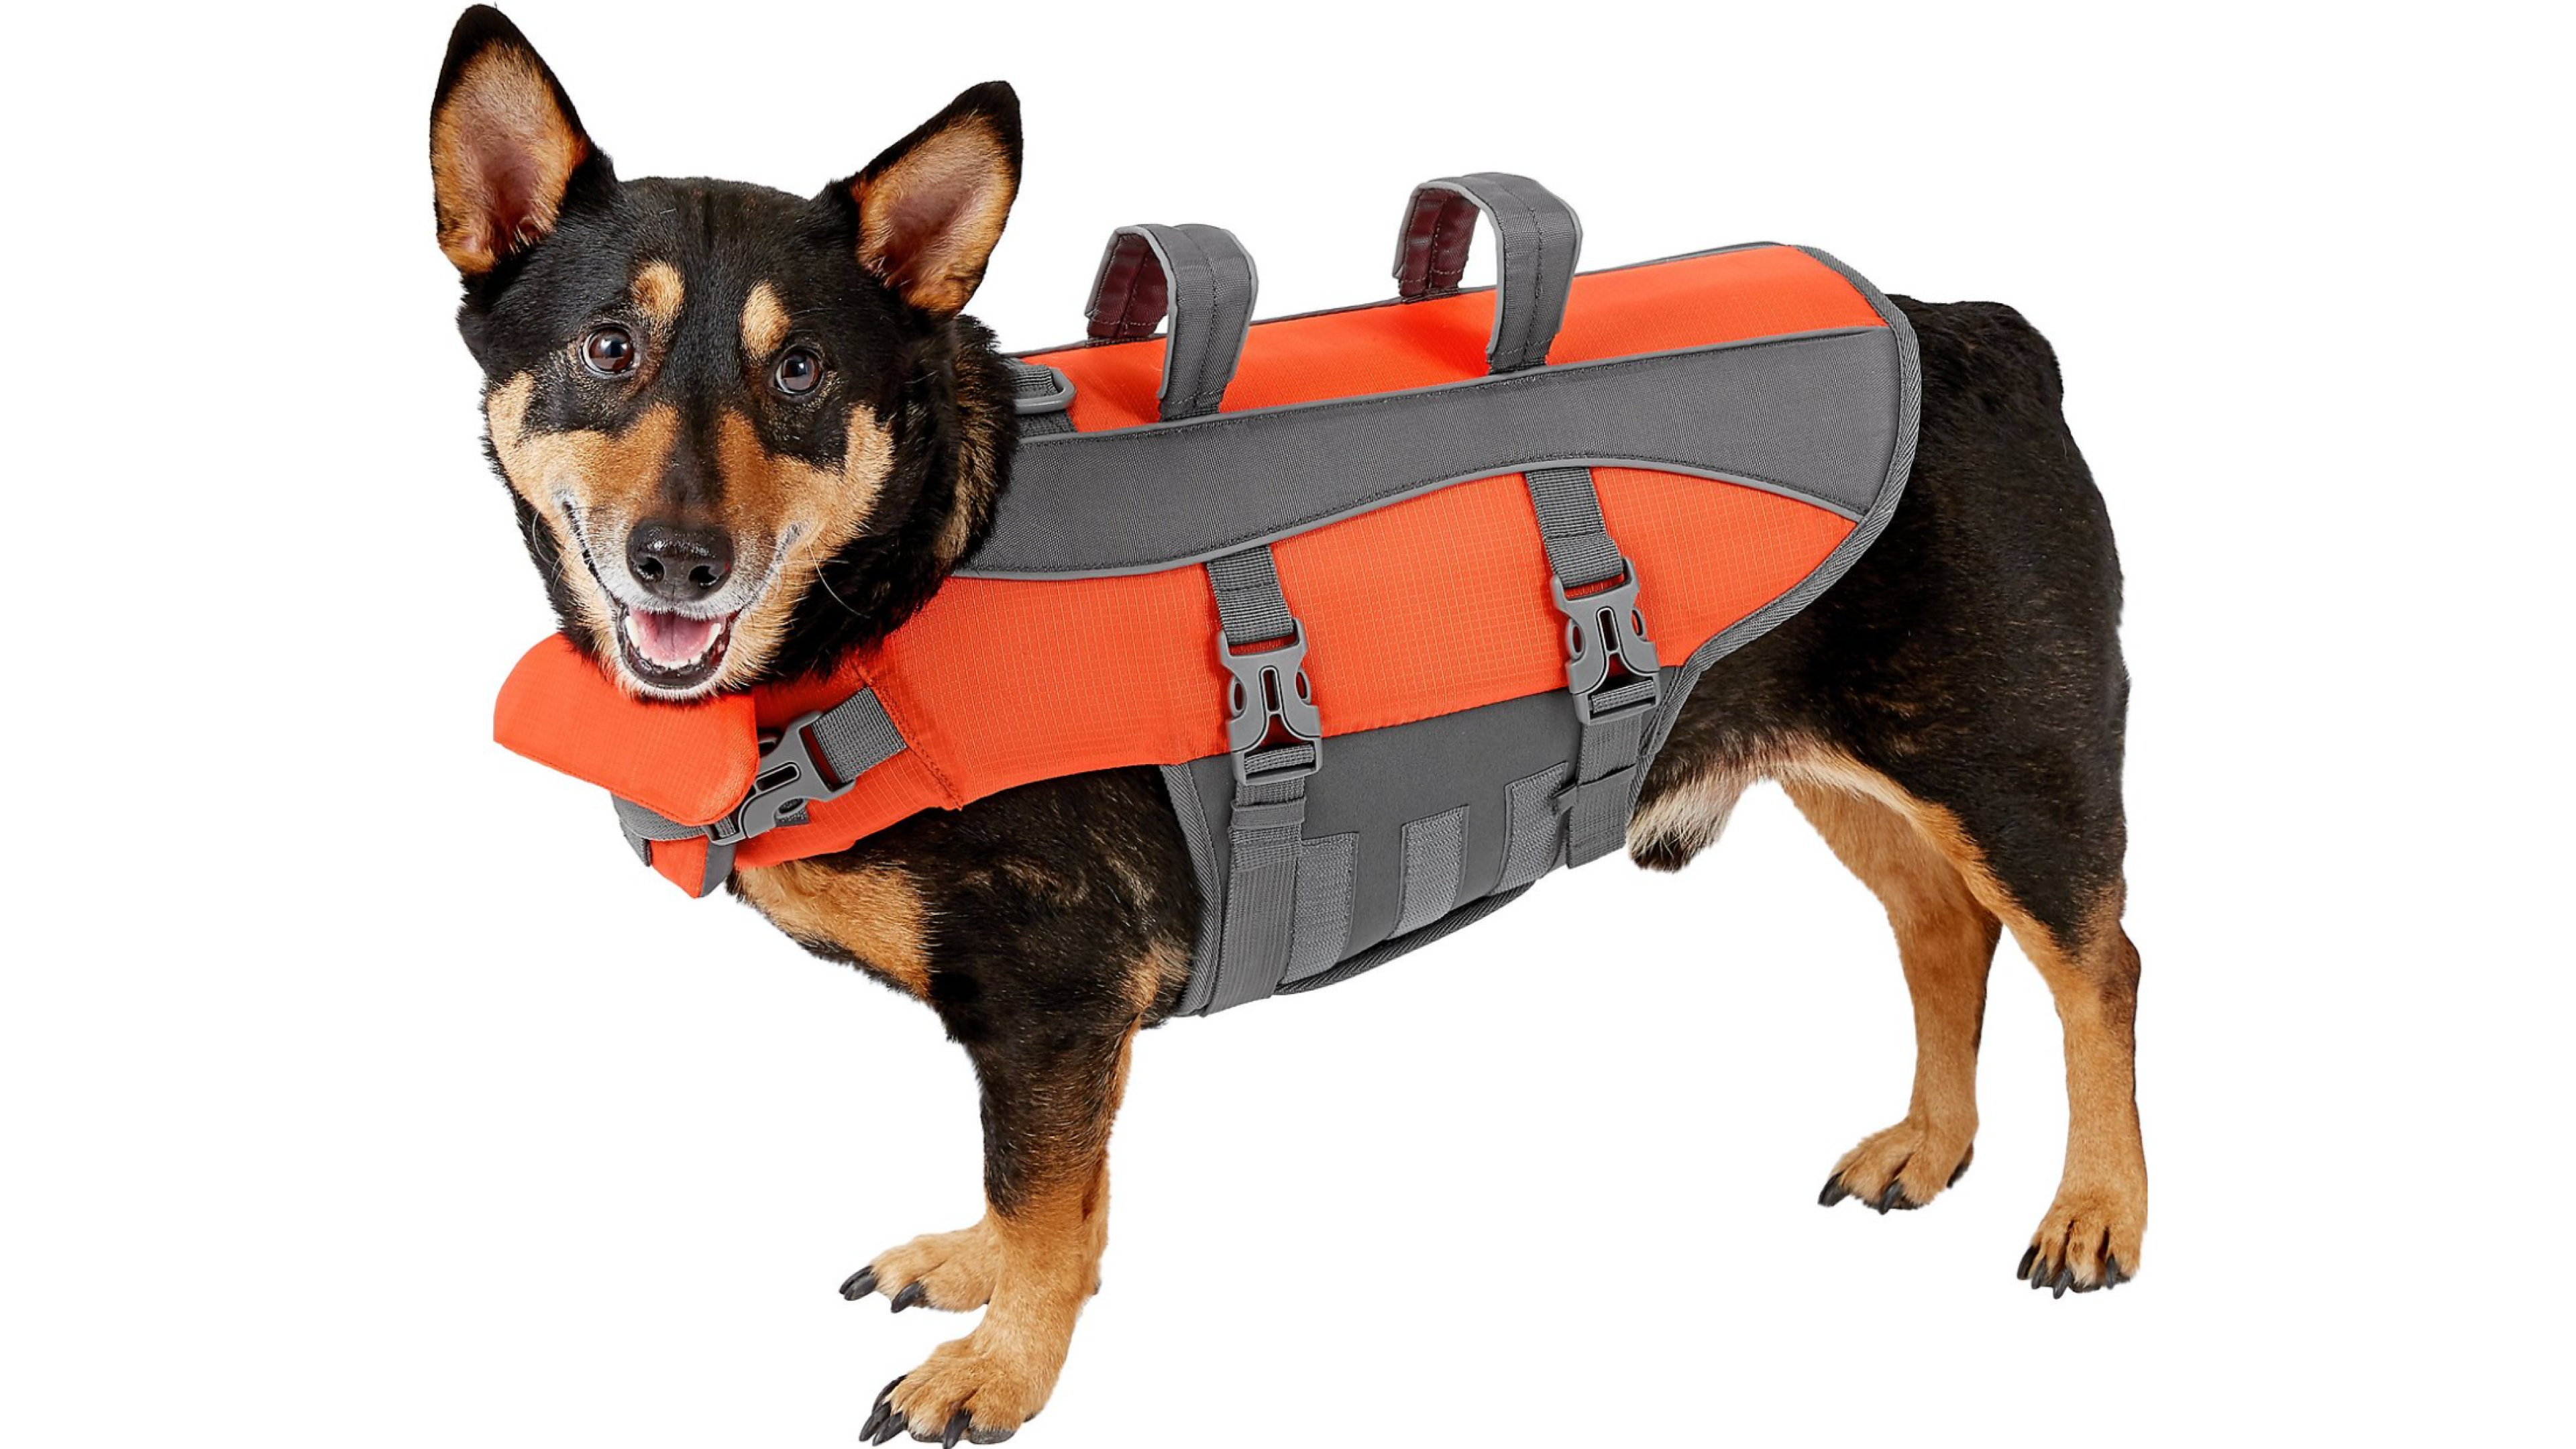 A life jacket for dogs